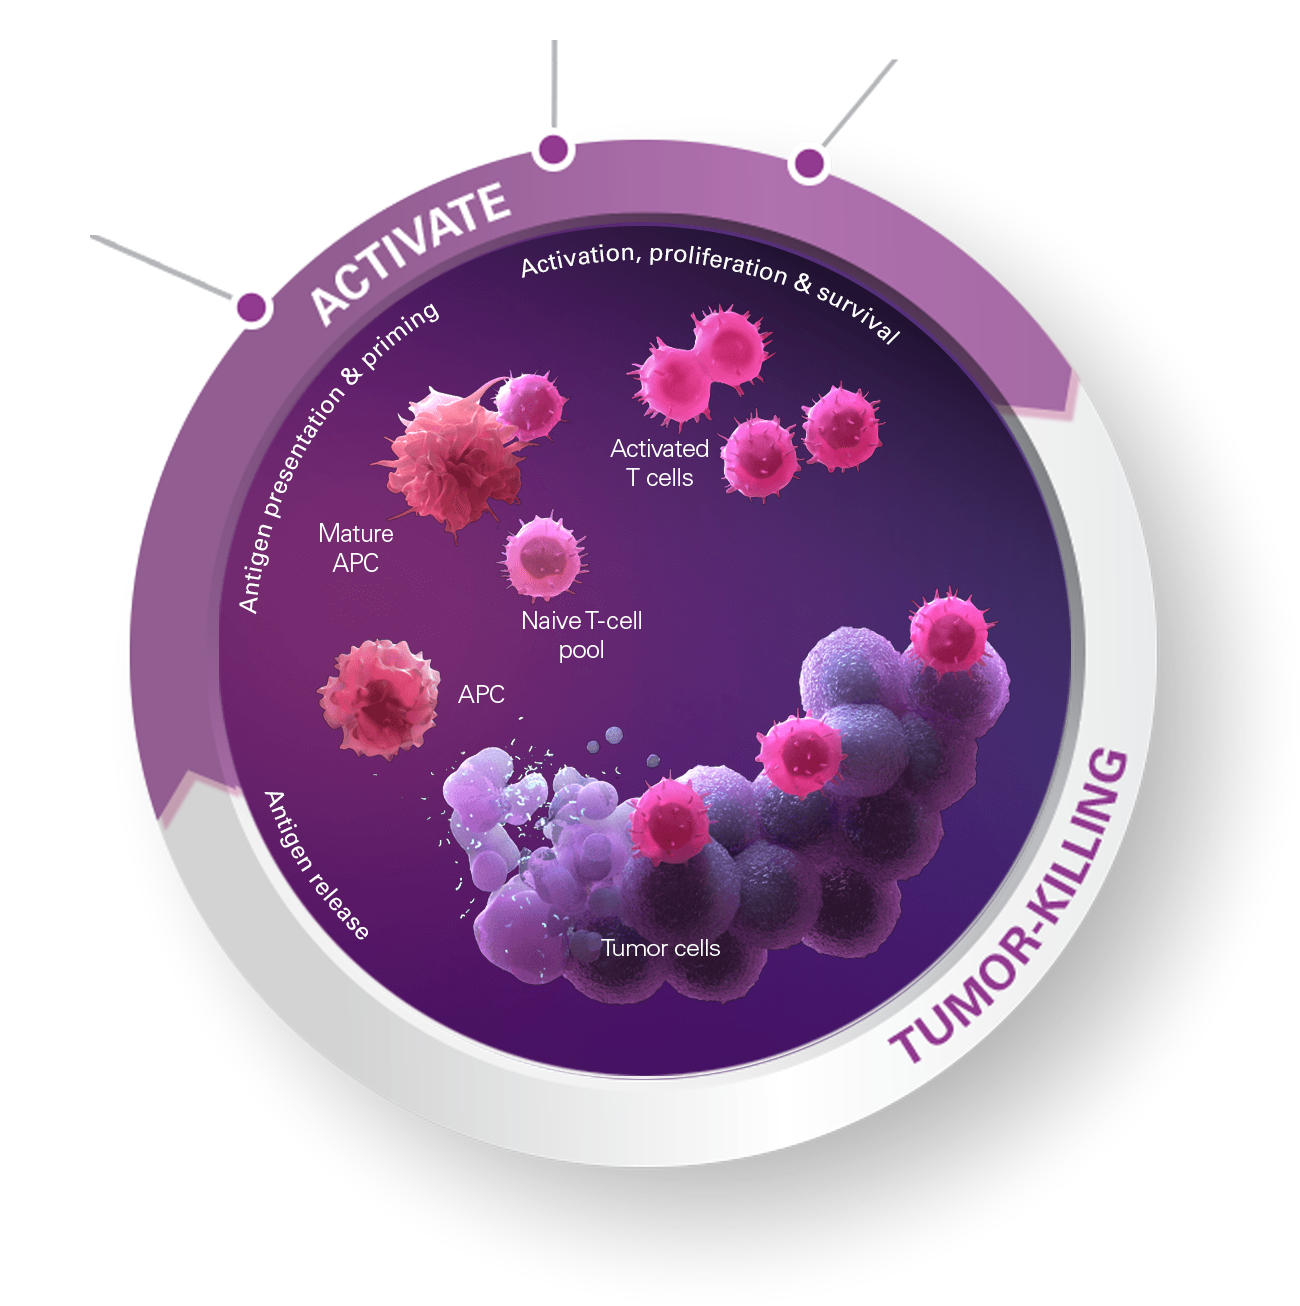 Activate the cancer immunity cycle with TLR 7/8, IL-2, or IL-15